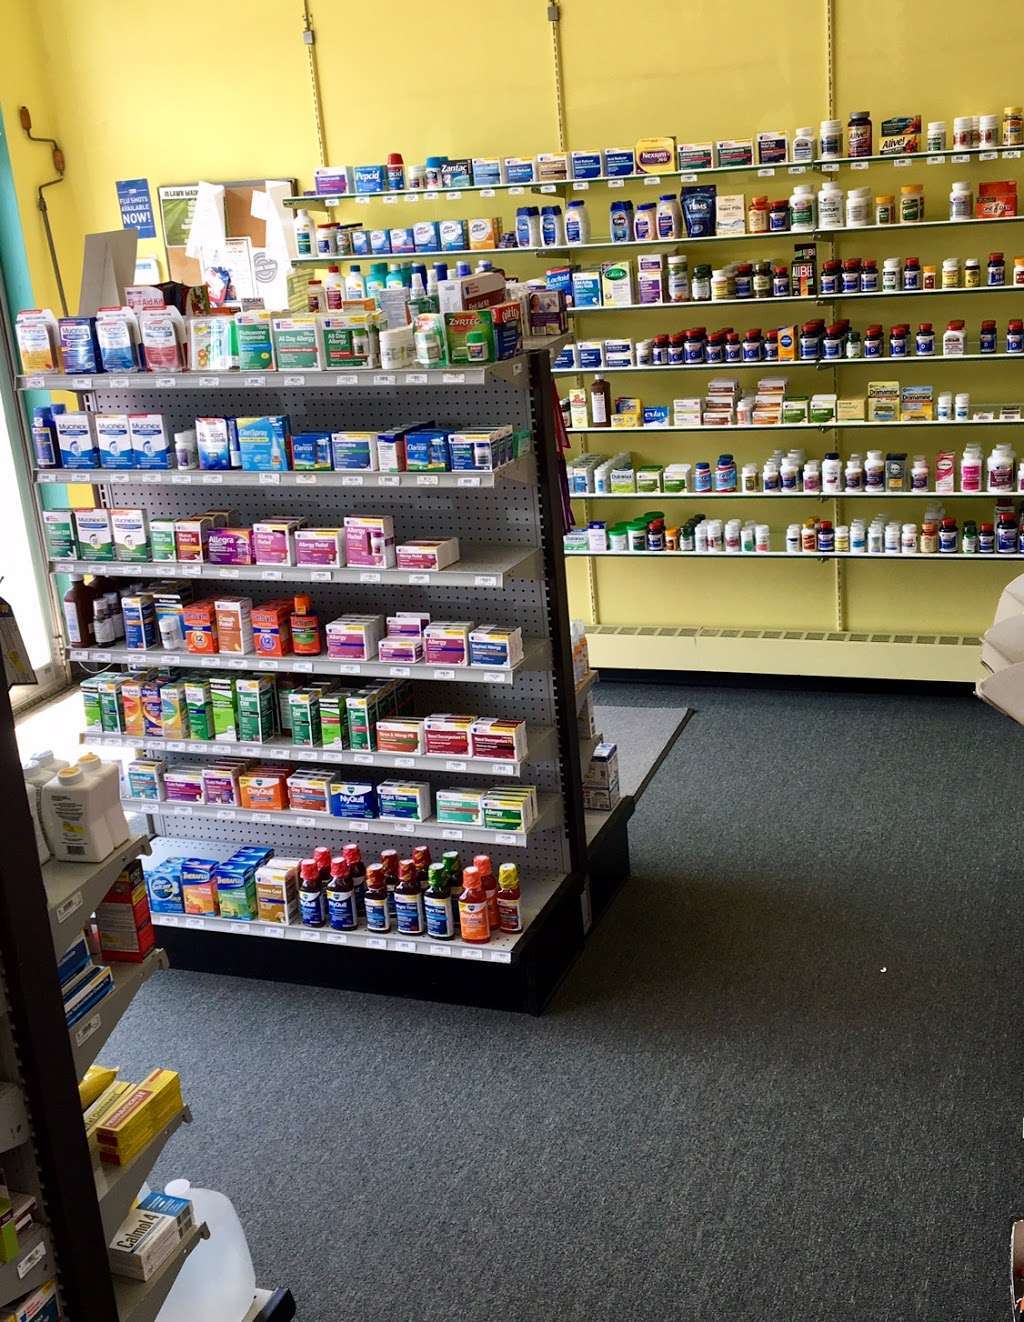 Family Pharmacy of Jessup Inc | 128 Constitution Ave, Jessup, PA 18434, USA | Phone: (570) 383-7311